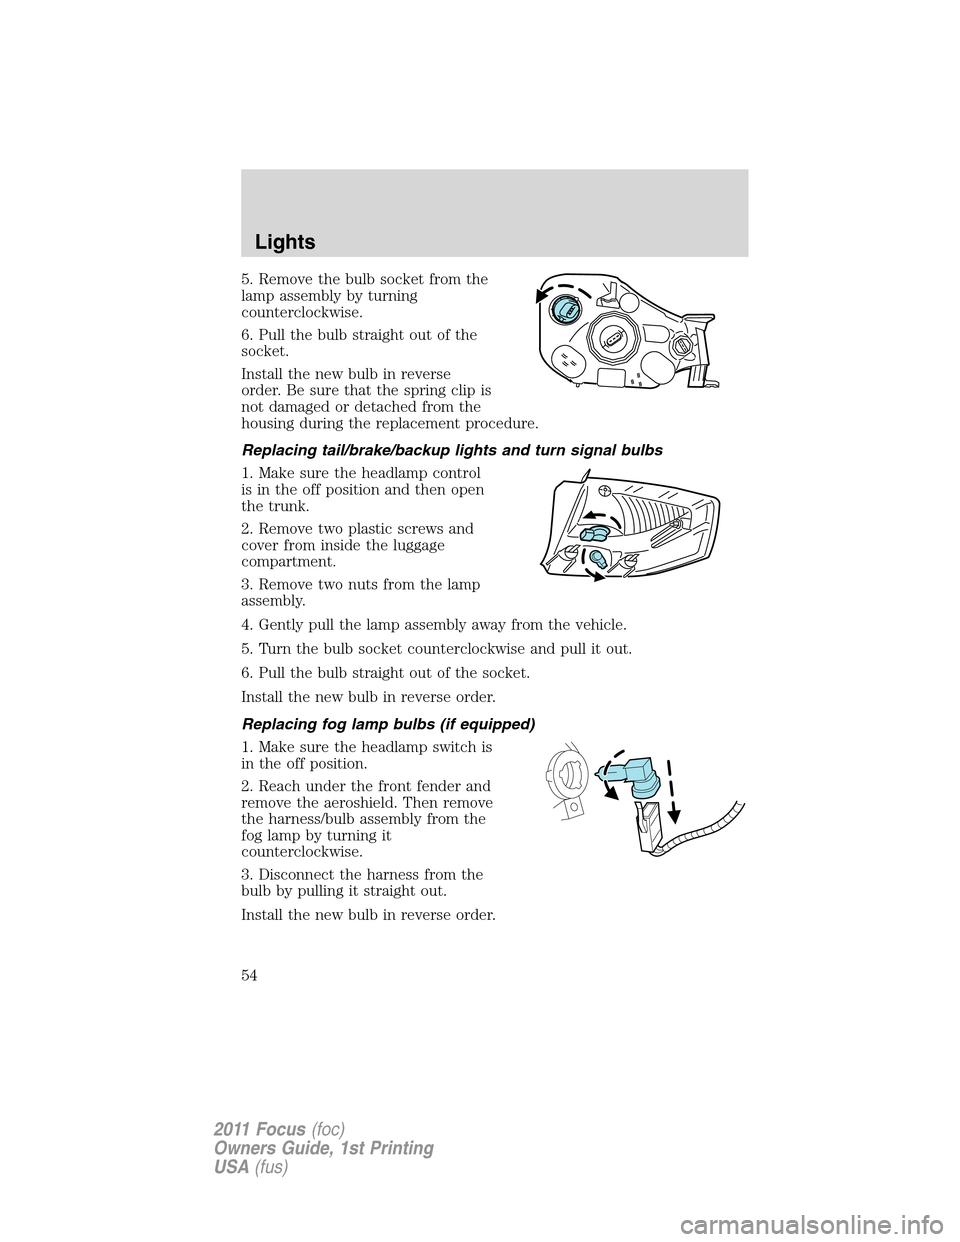 FORD FOCUS 2011 2.G Owners Manual 5. Remove the bulb socket from the
lamp assembly by turning
counterclockwise.
6. Pull the bulb straight out of the
socket.
Install the new bulb in reverse
order. Be sure that the spring clip is
not da